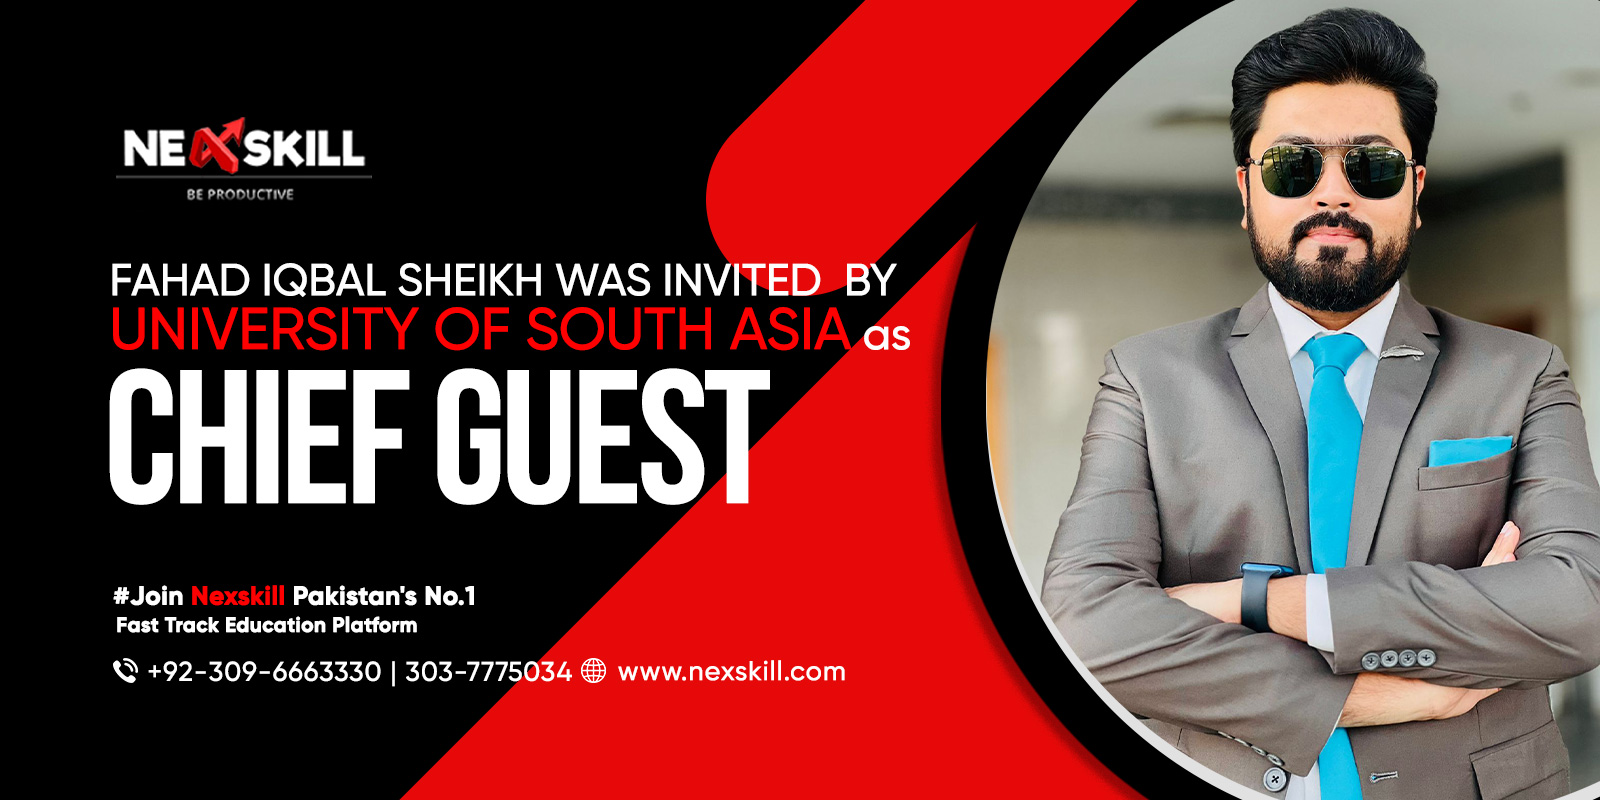 CEO of Nexskill Fahad Iqbal Sheikh Was Invited  By University of South Asia as Chief Guest to Evaluate Digital AI Start